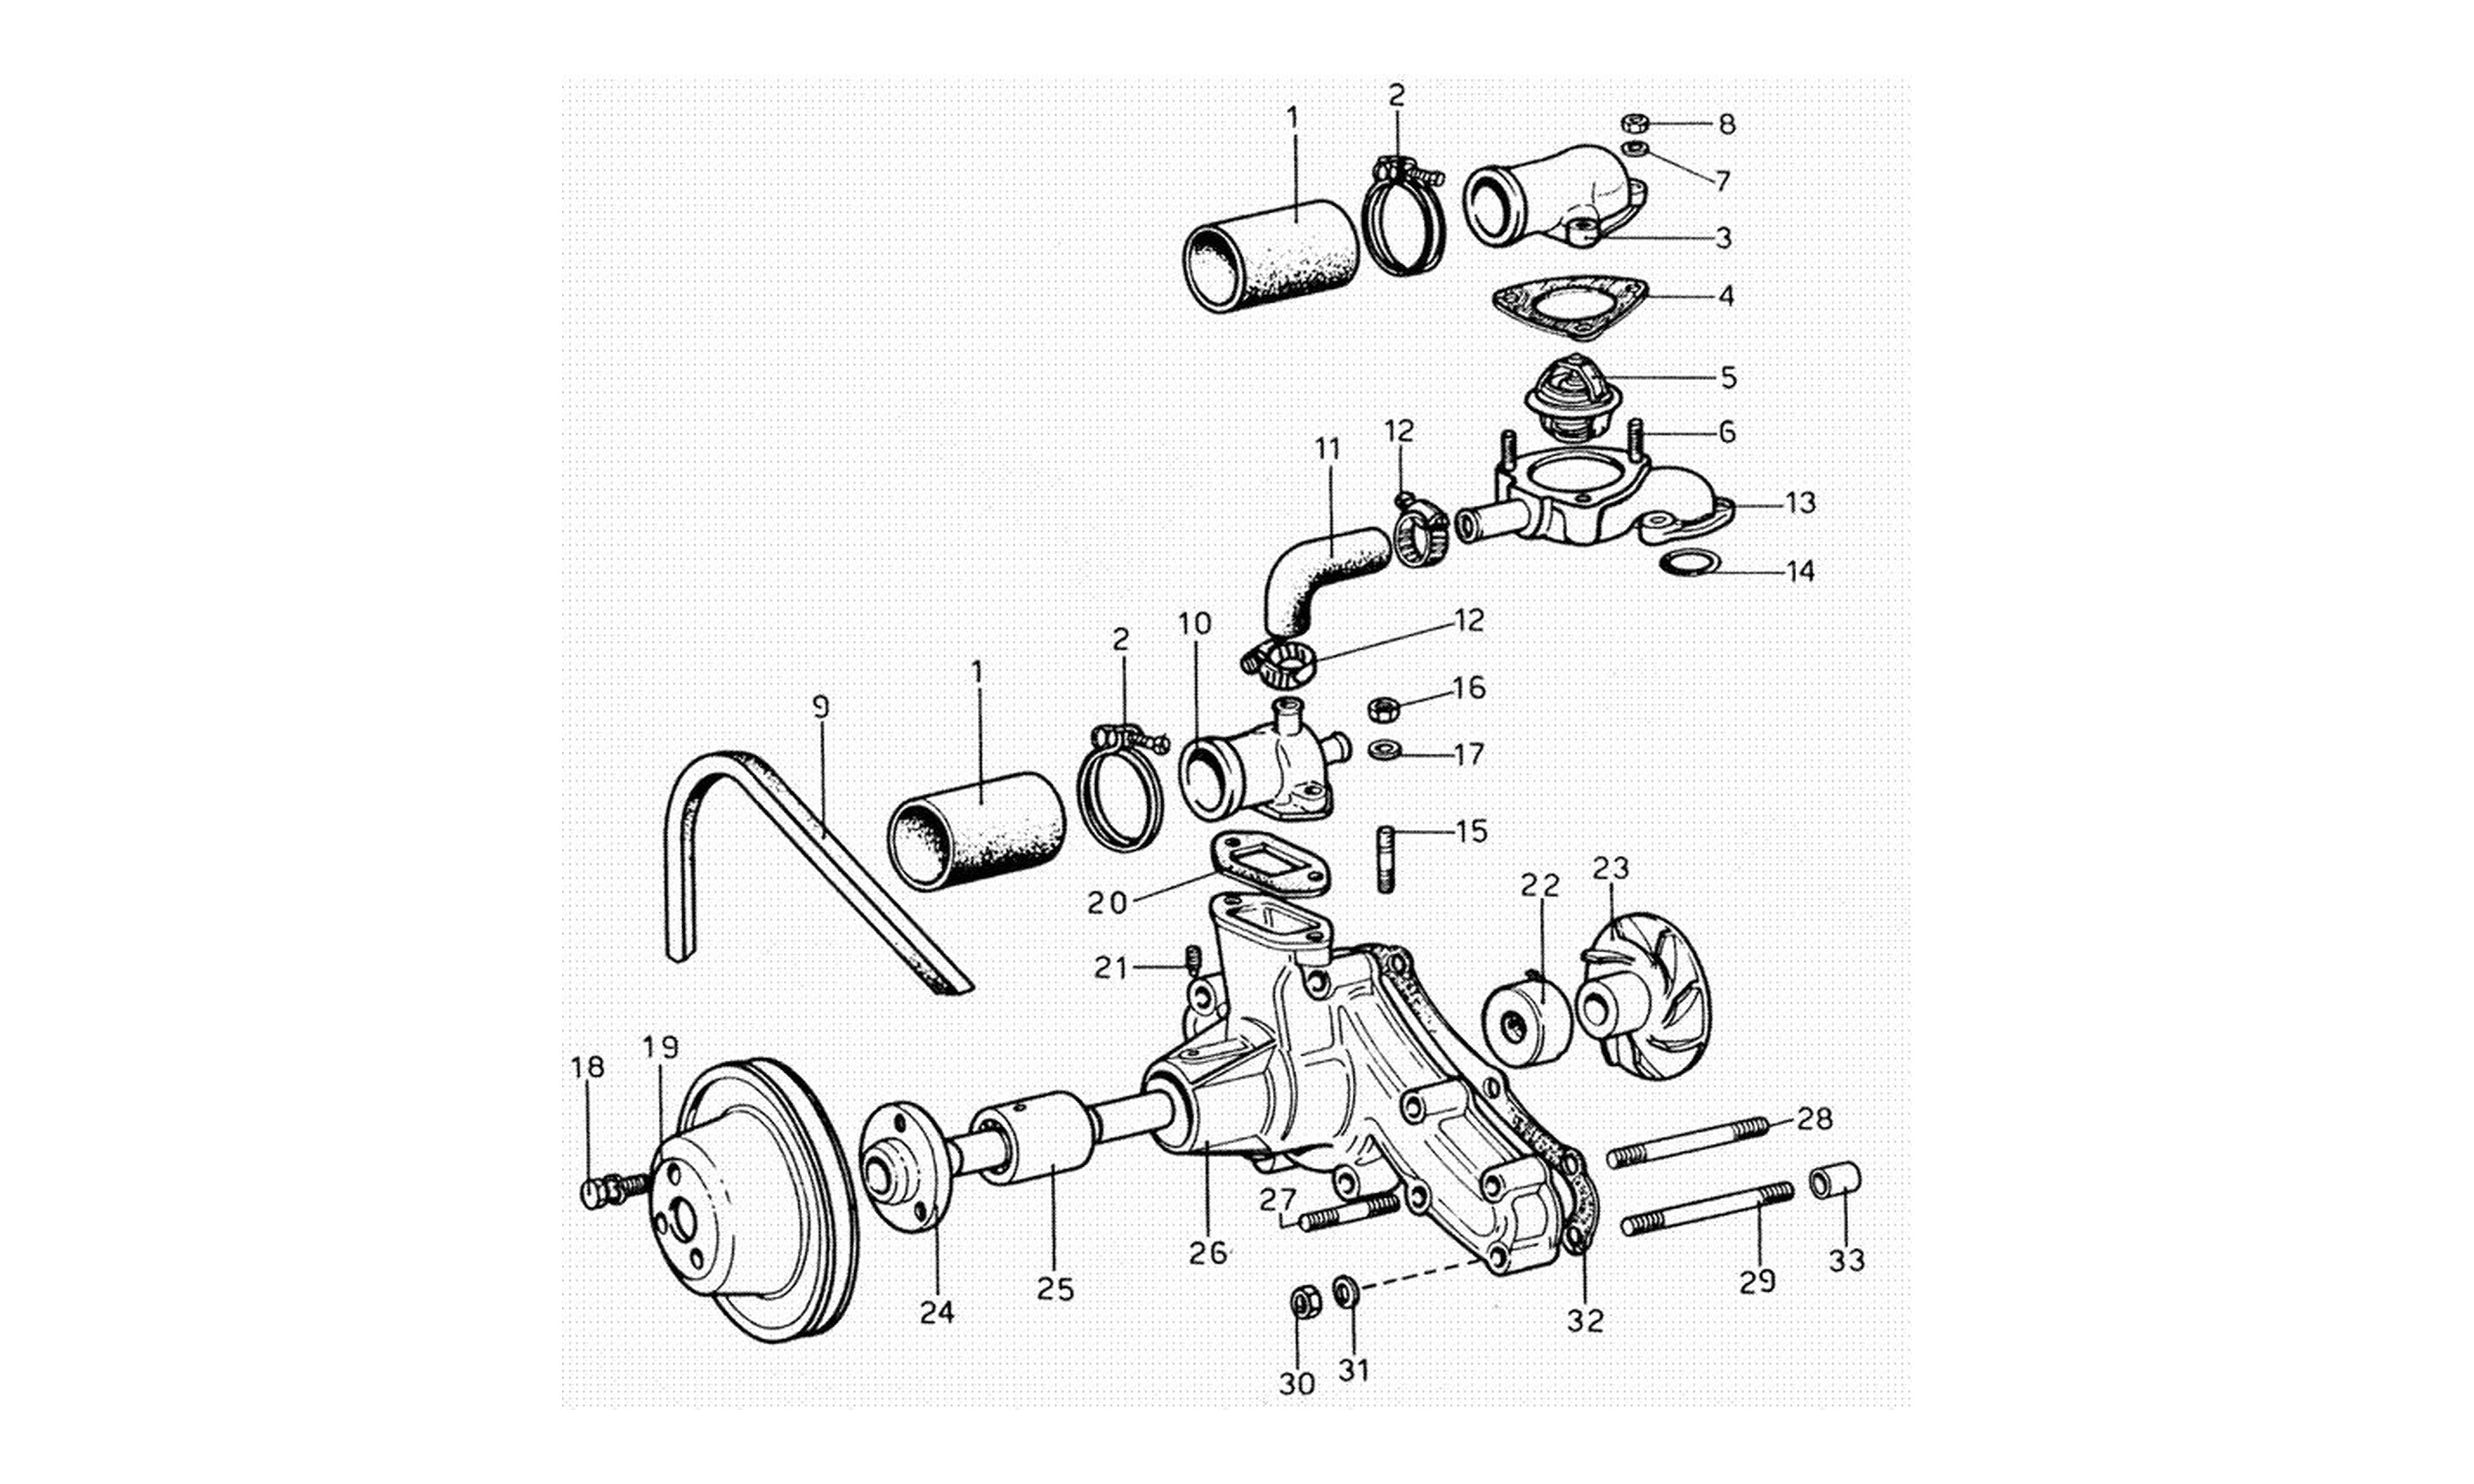 Schematic: Water Pump And Pipes